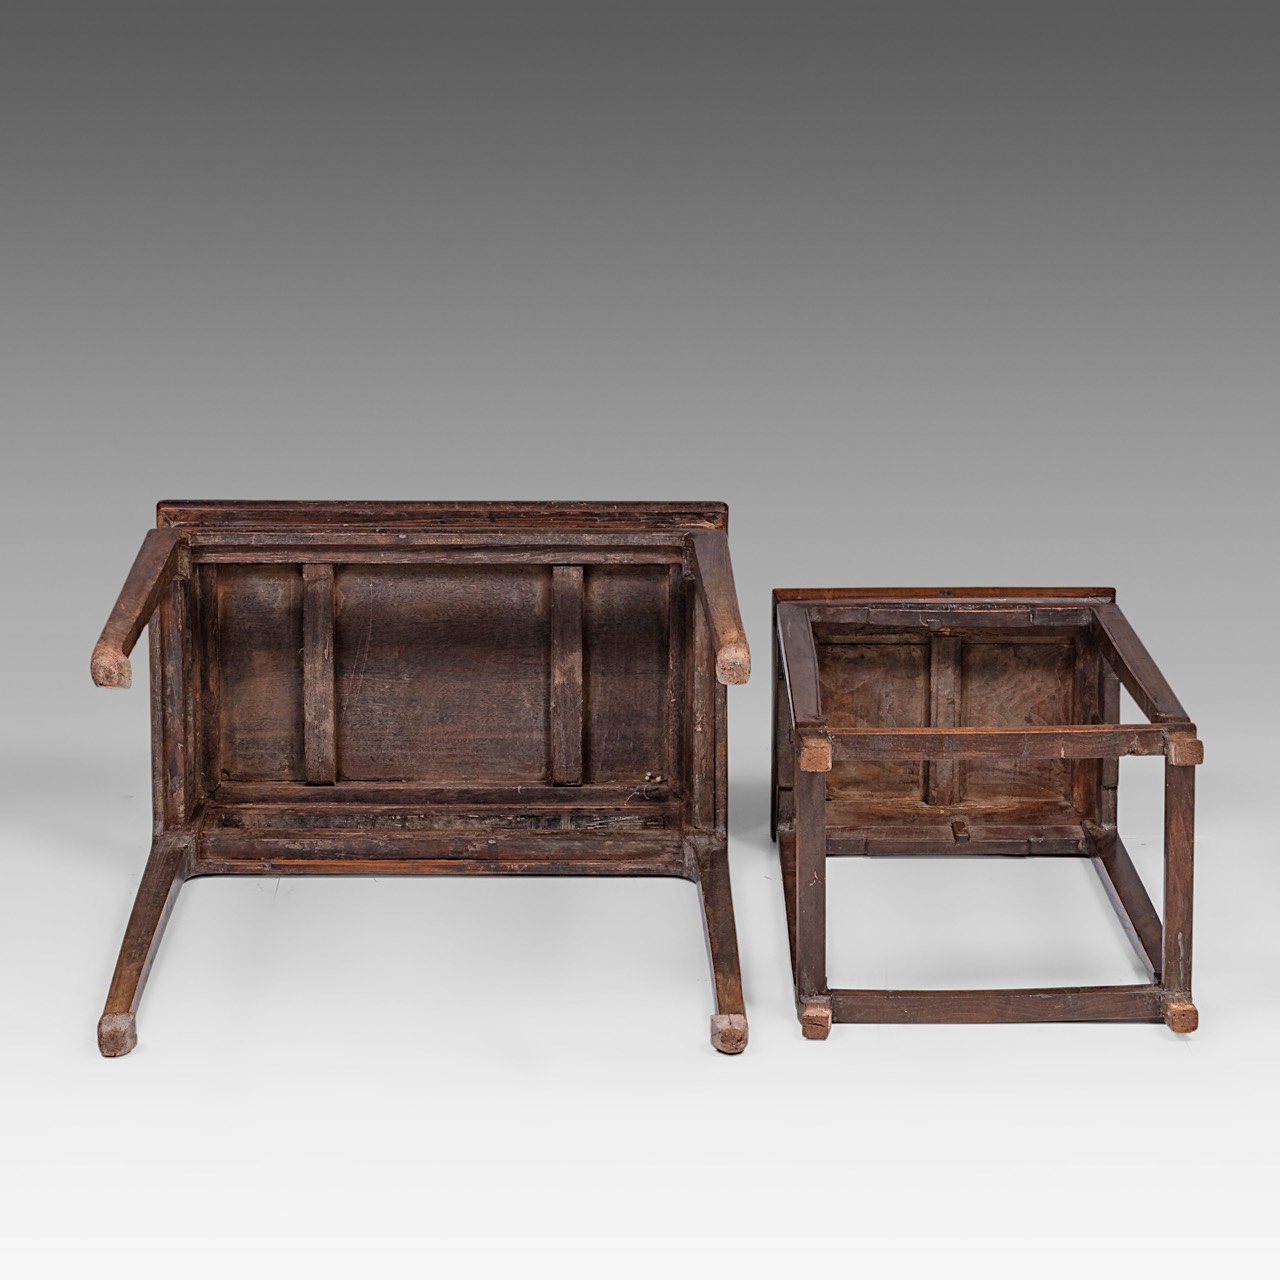 Two Chinese hardwood side tables, mid - late Qing dynasty, largest H 82 - 69 x 42 cm - Image 7 of 7